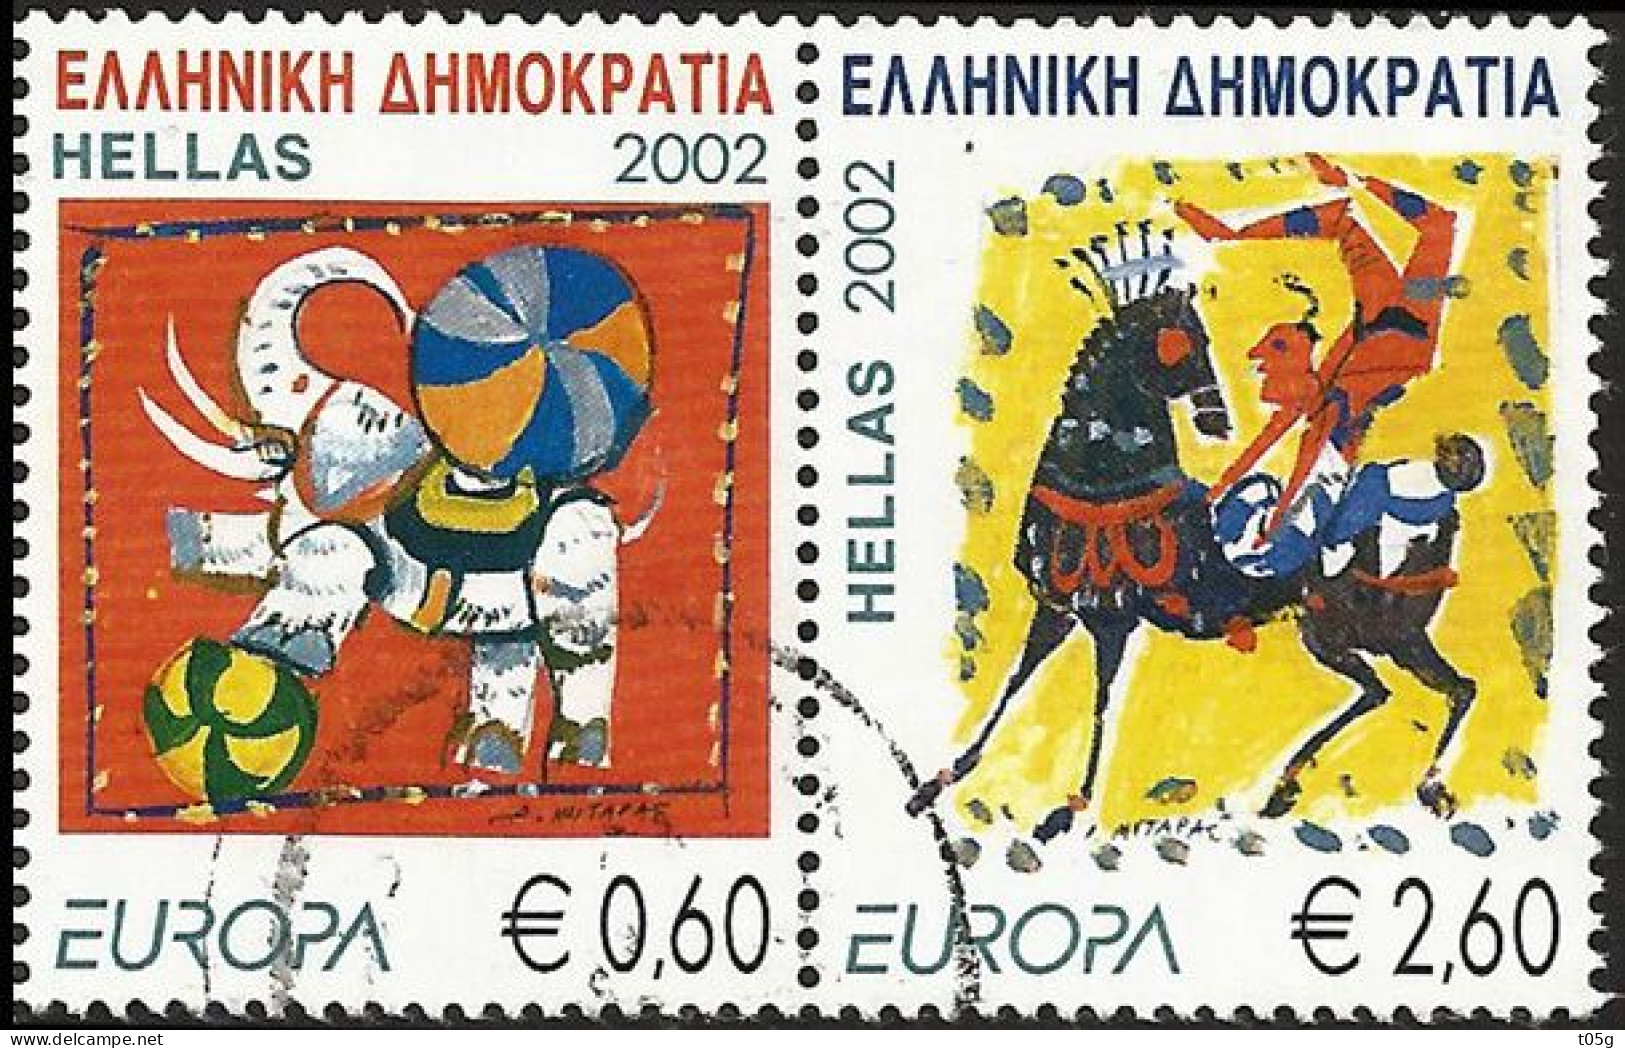 GREECE- GRECE - HELLAS Europa 2002: Se- Tenant - With Perforated All Around- Compl. Set Used - Gebruikt